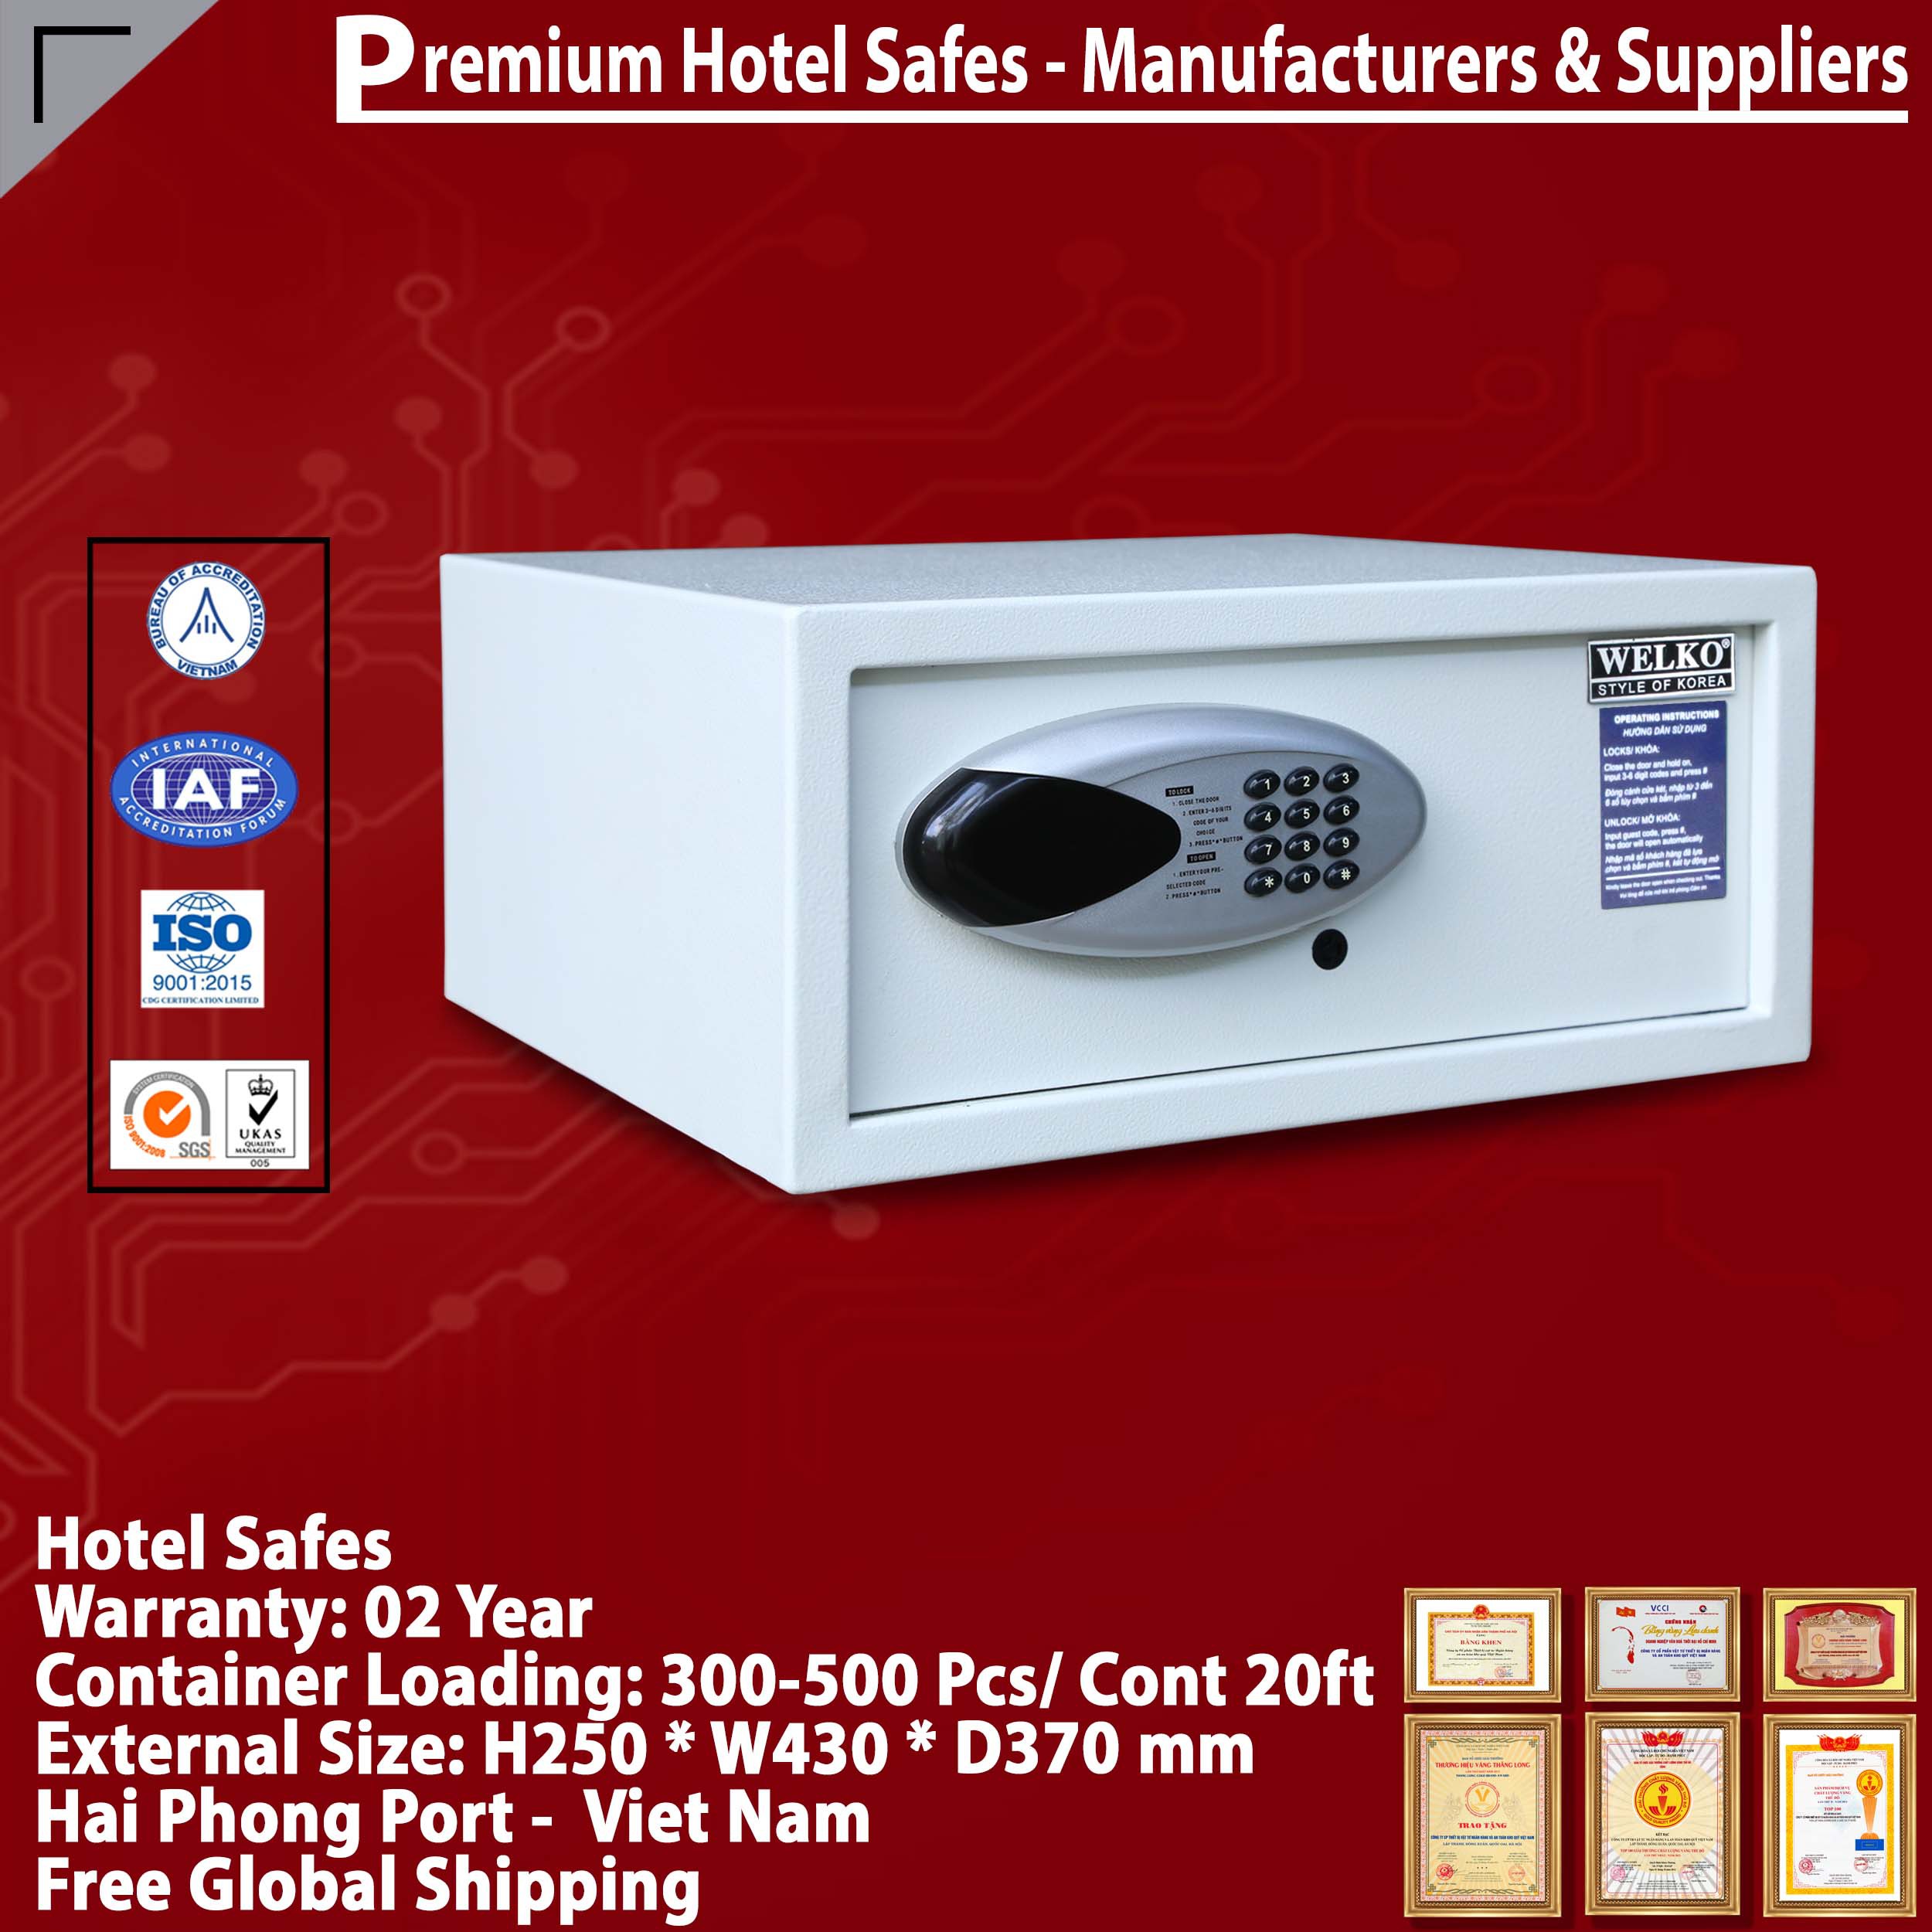 Portable Hotel Safes Manufacturing Facility